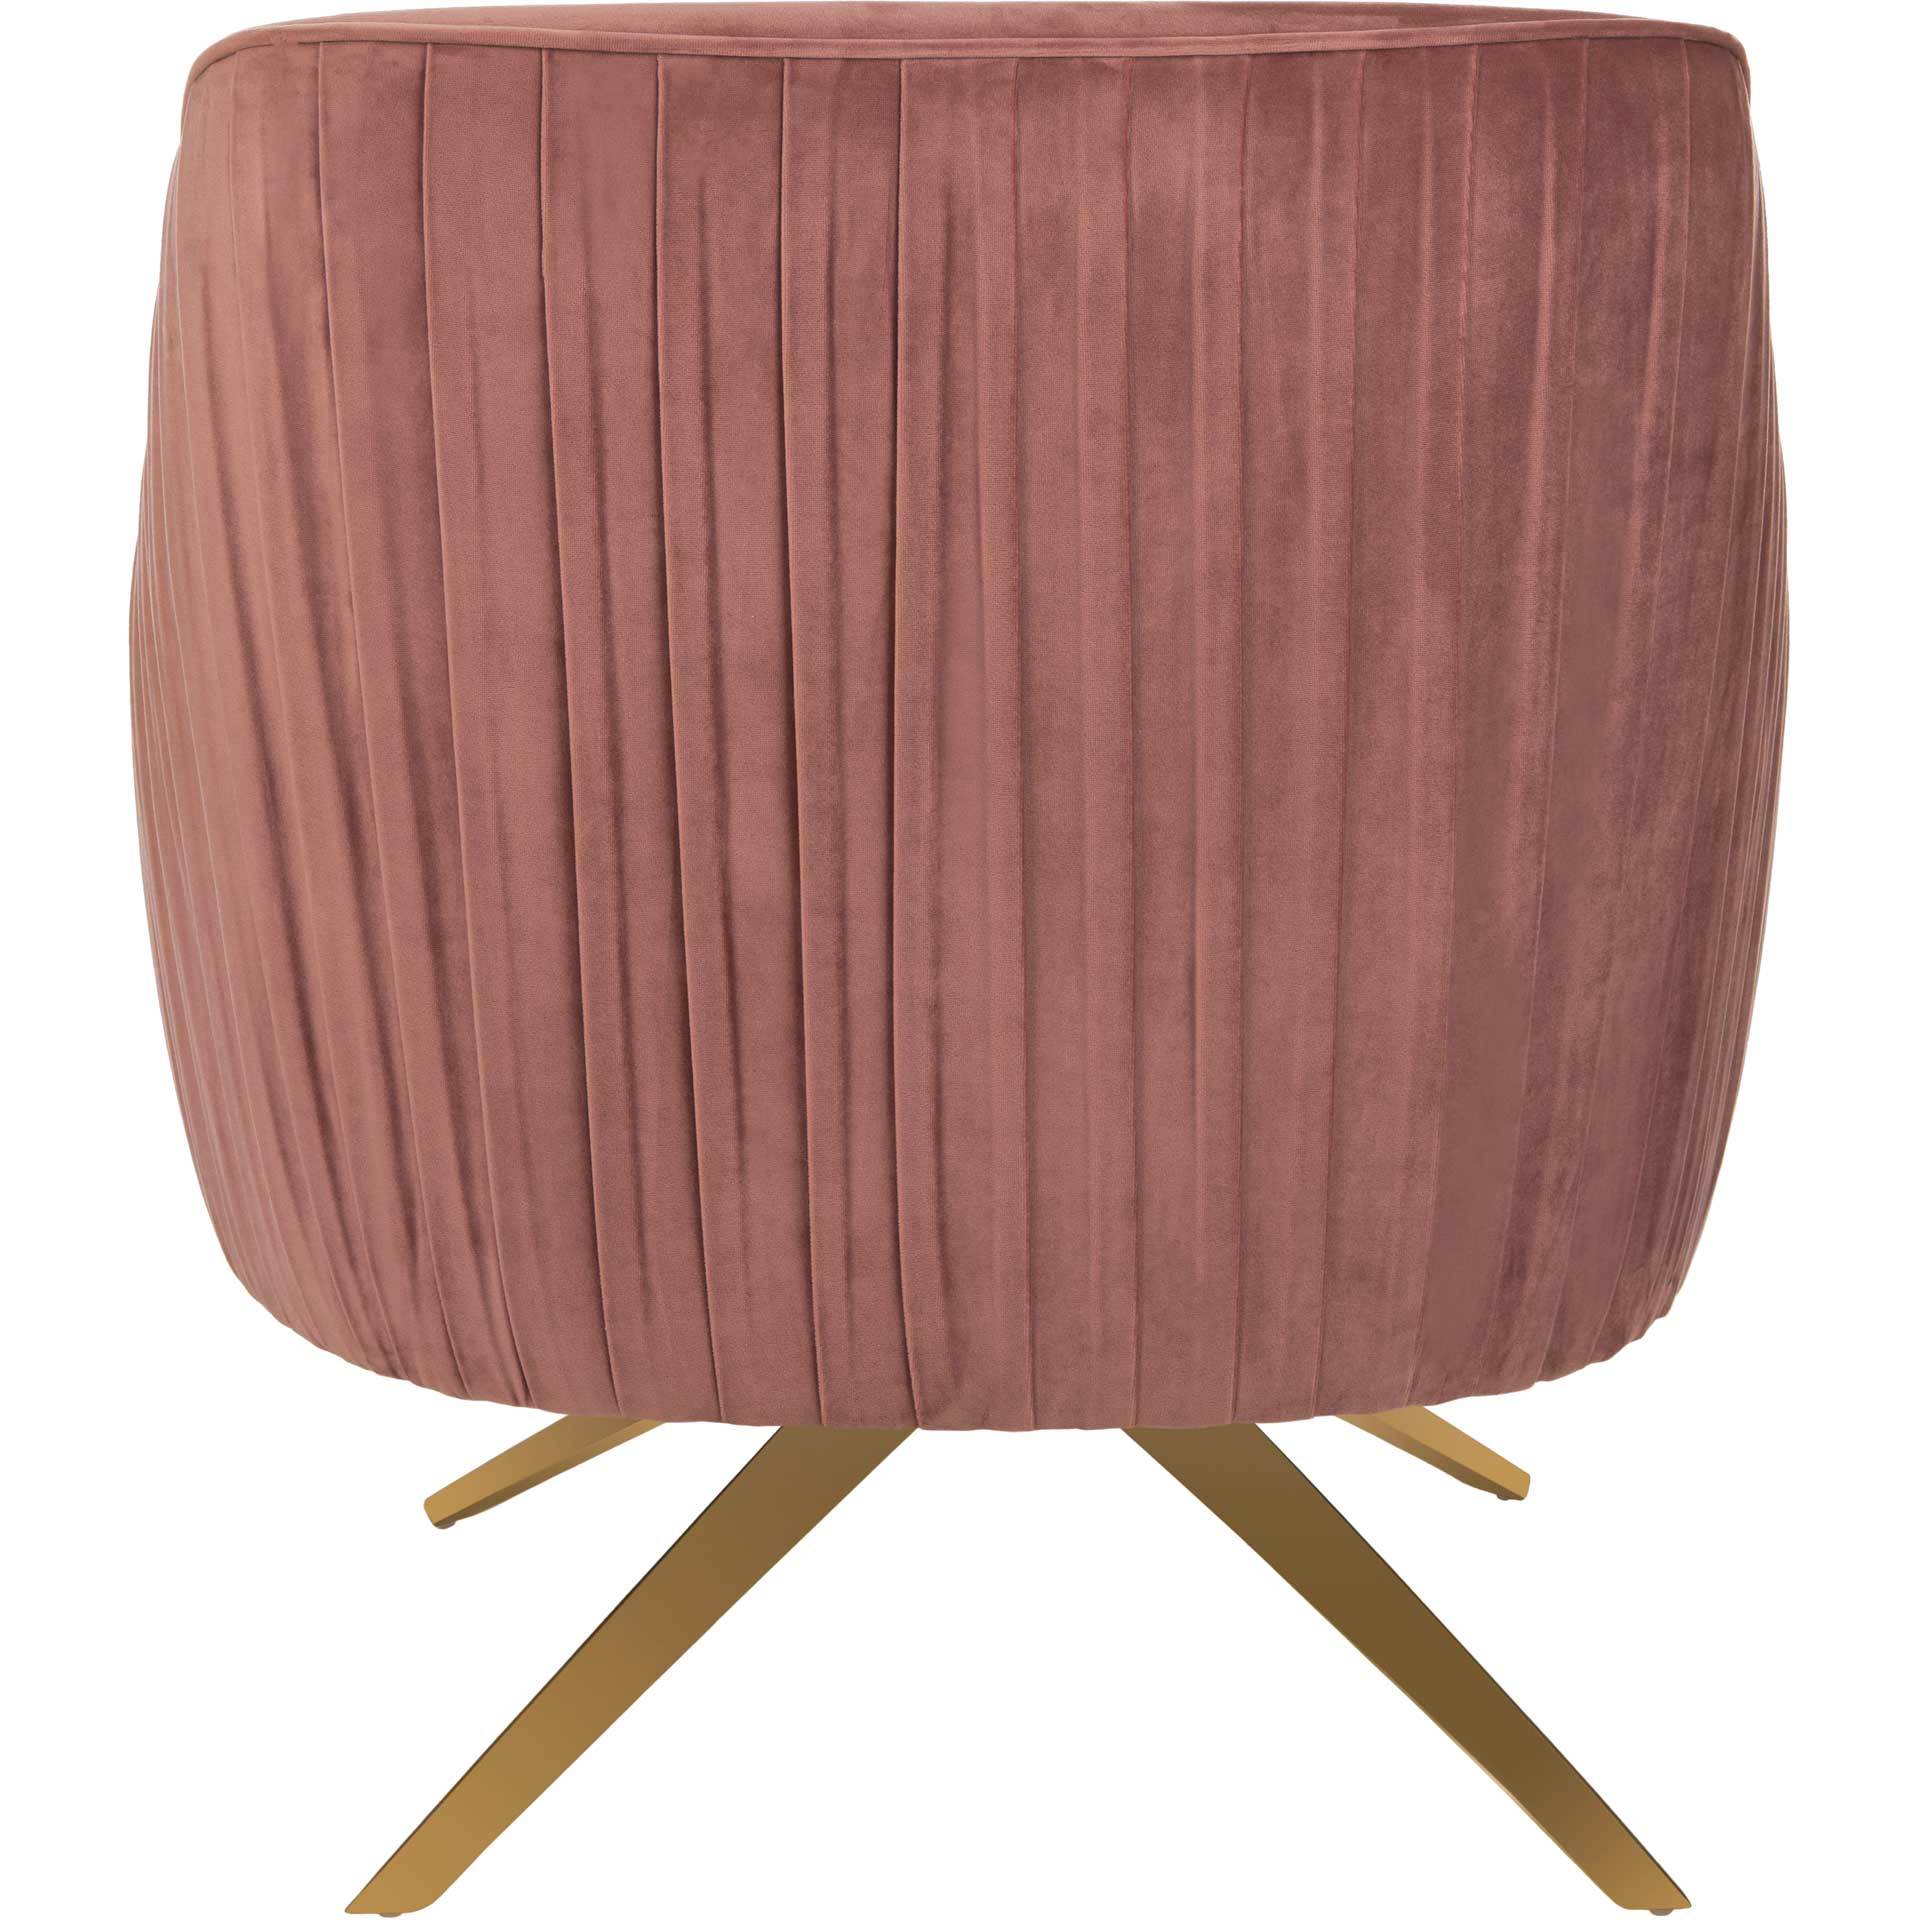 Titus Pleated Arm Chair Dusty Rose/Gold